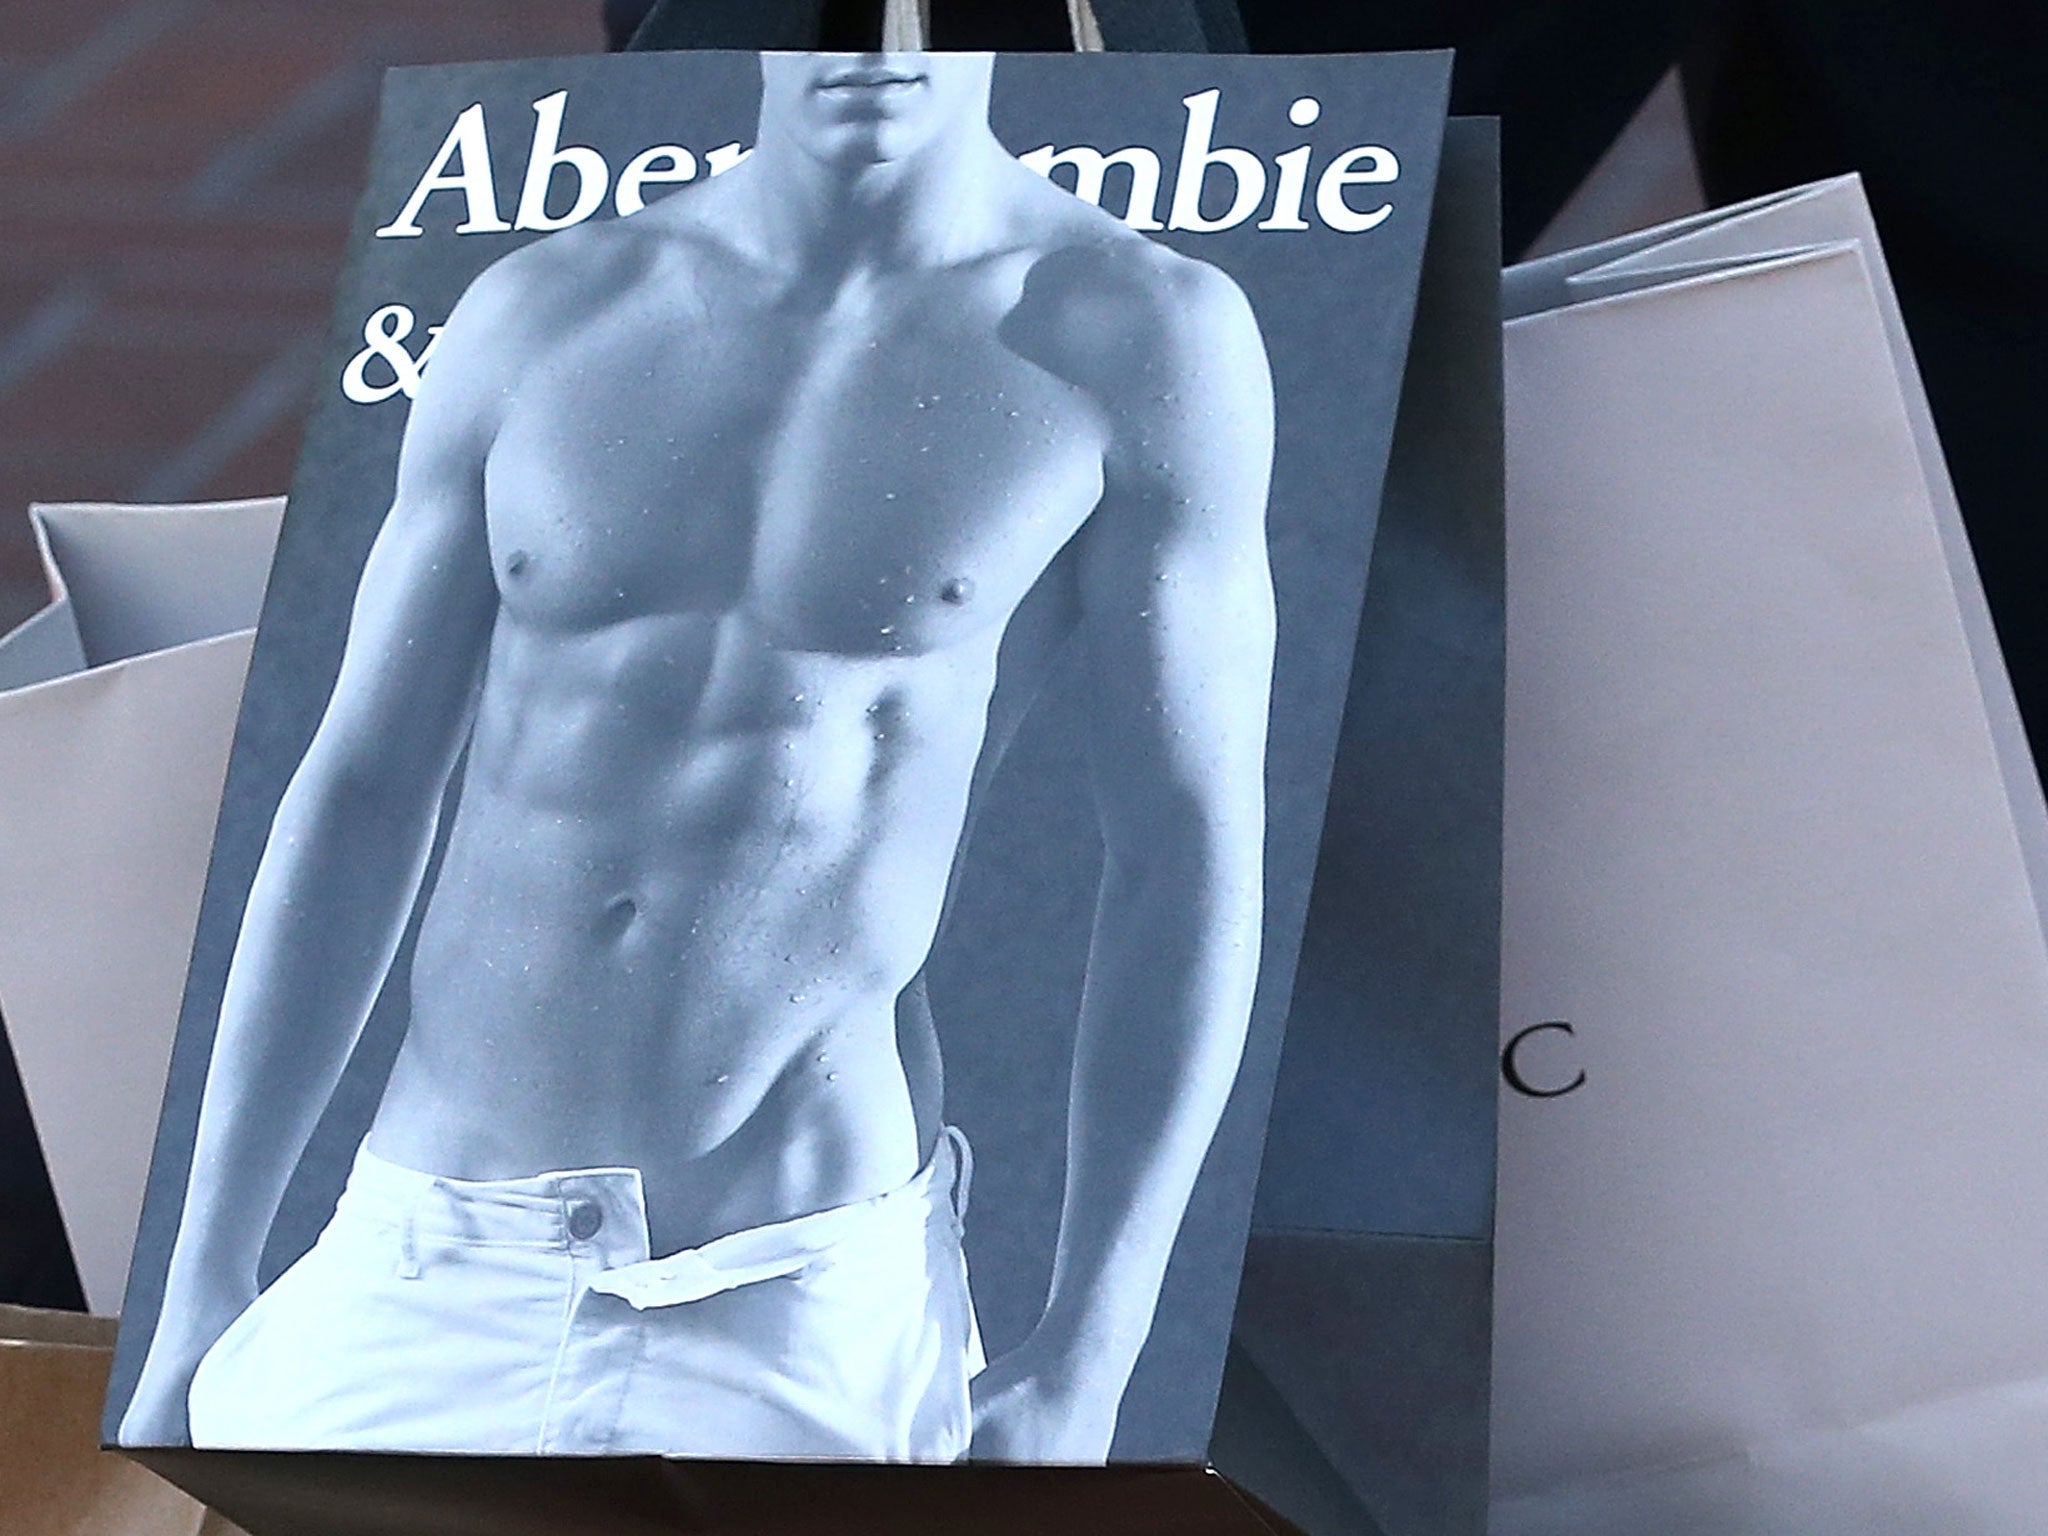 Abercrombie & Fitch bags feature fit young models